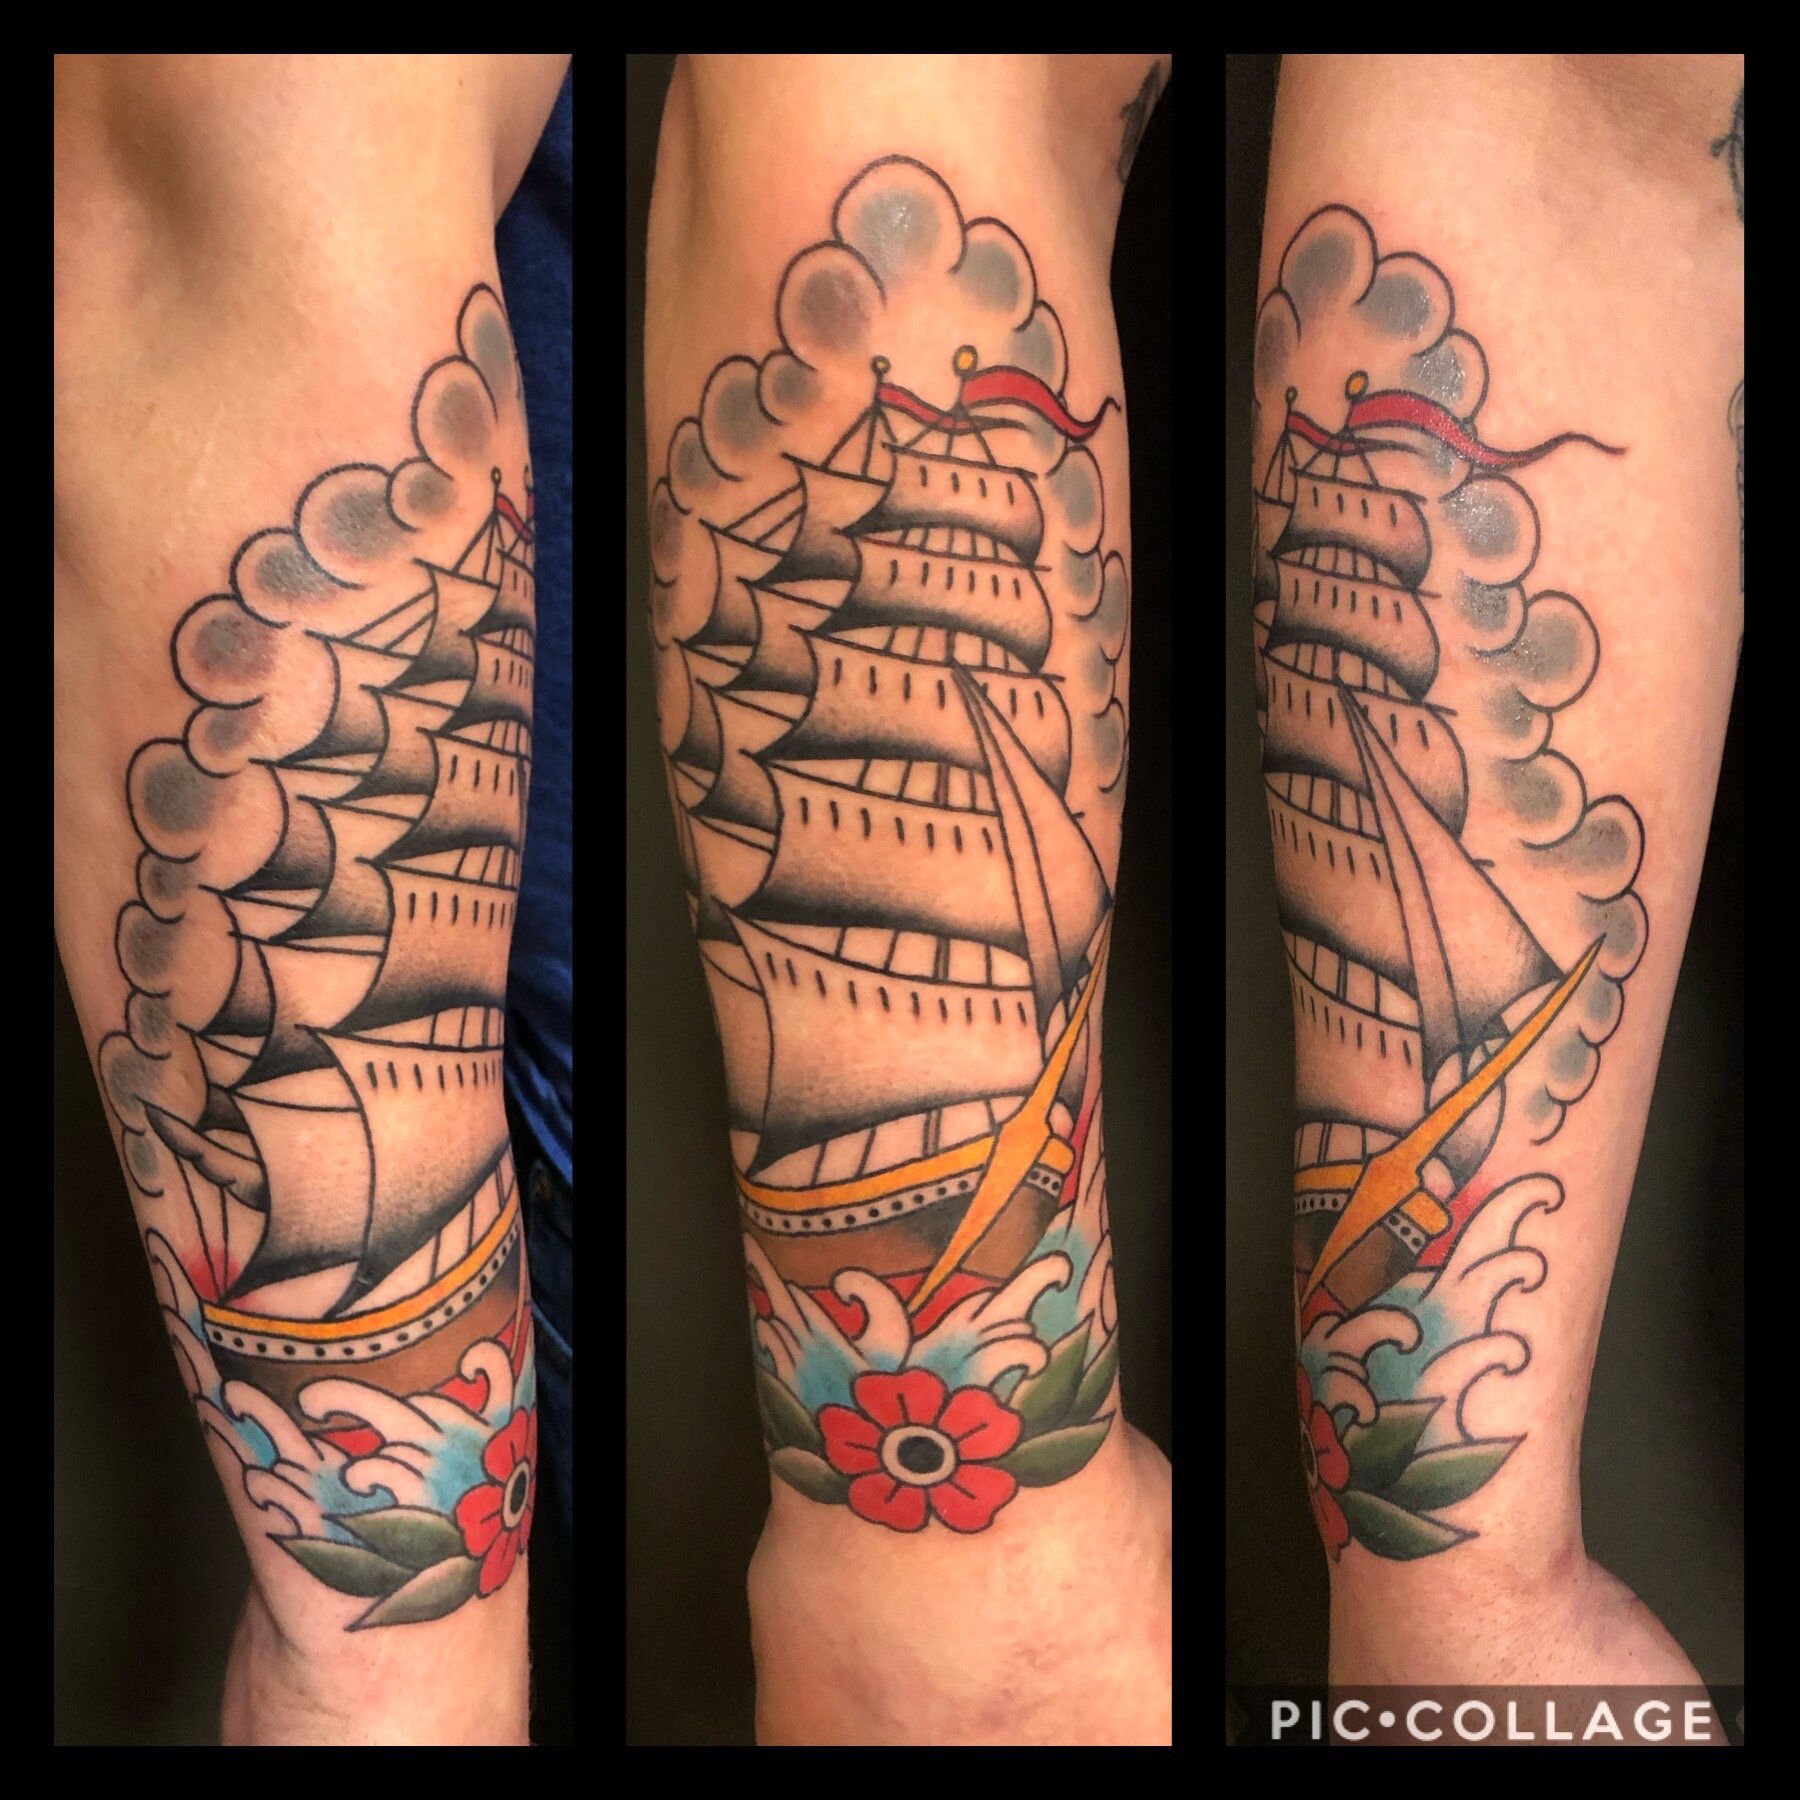 Traditional Style Tattoos in San Diego | Funhouse Ink